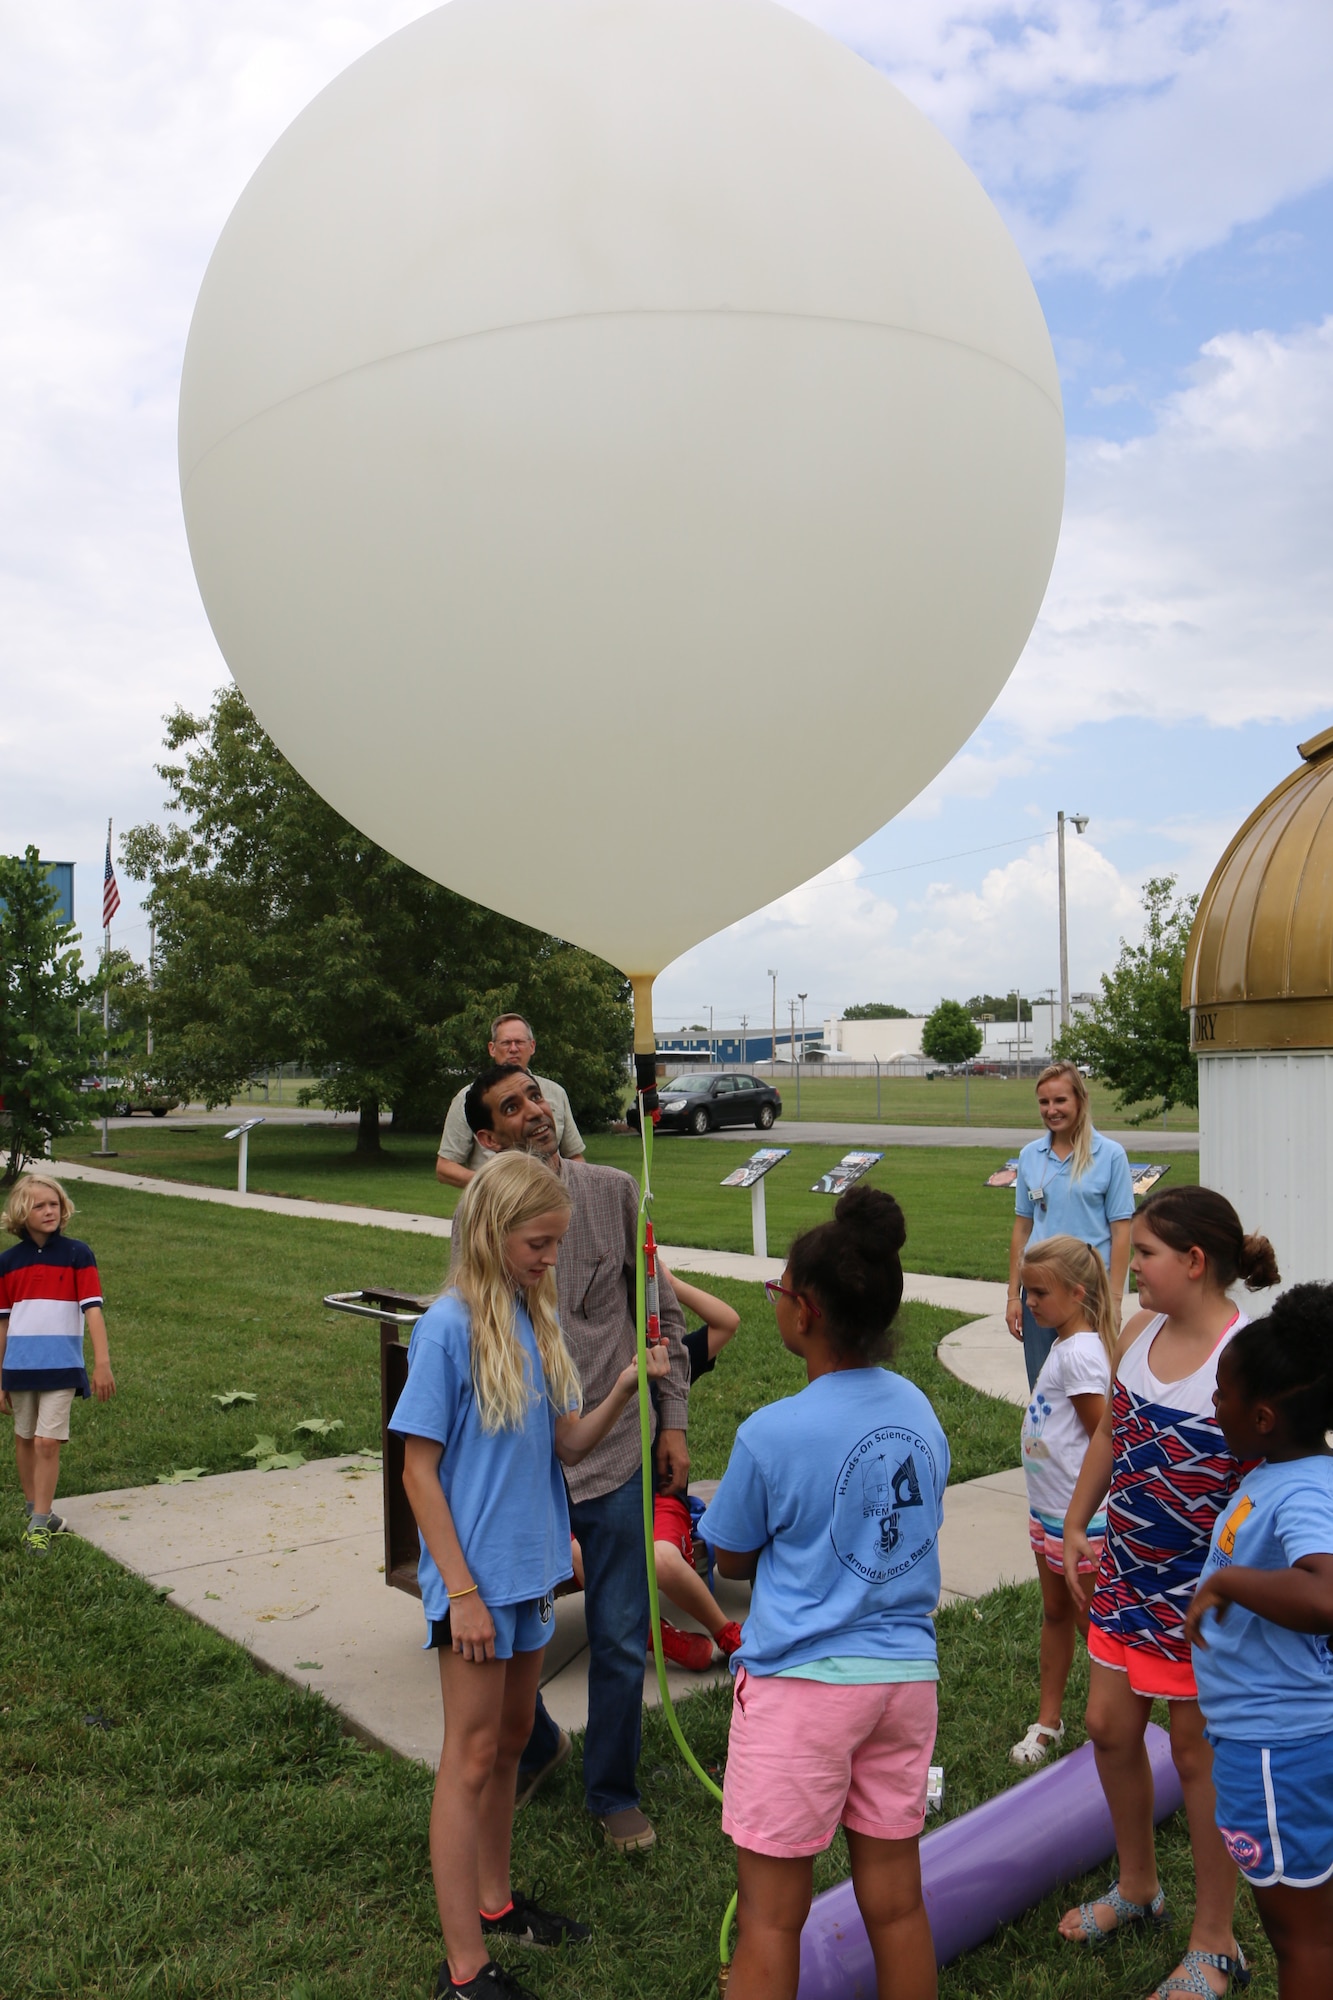 Participants in the Hands-On Science Center Air Force STEM Summer Camp offer a helping hand as a high-altitude balloon prepares for launch. The balloon was launched on June 19 from the grounds of the HOSC as part of the Summer Camp program. (U.S. Air Force photo/Bradley Hicks)